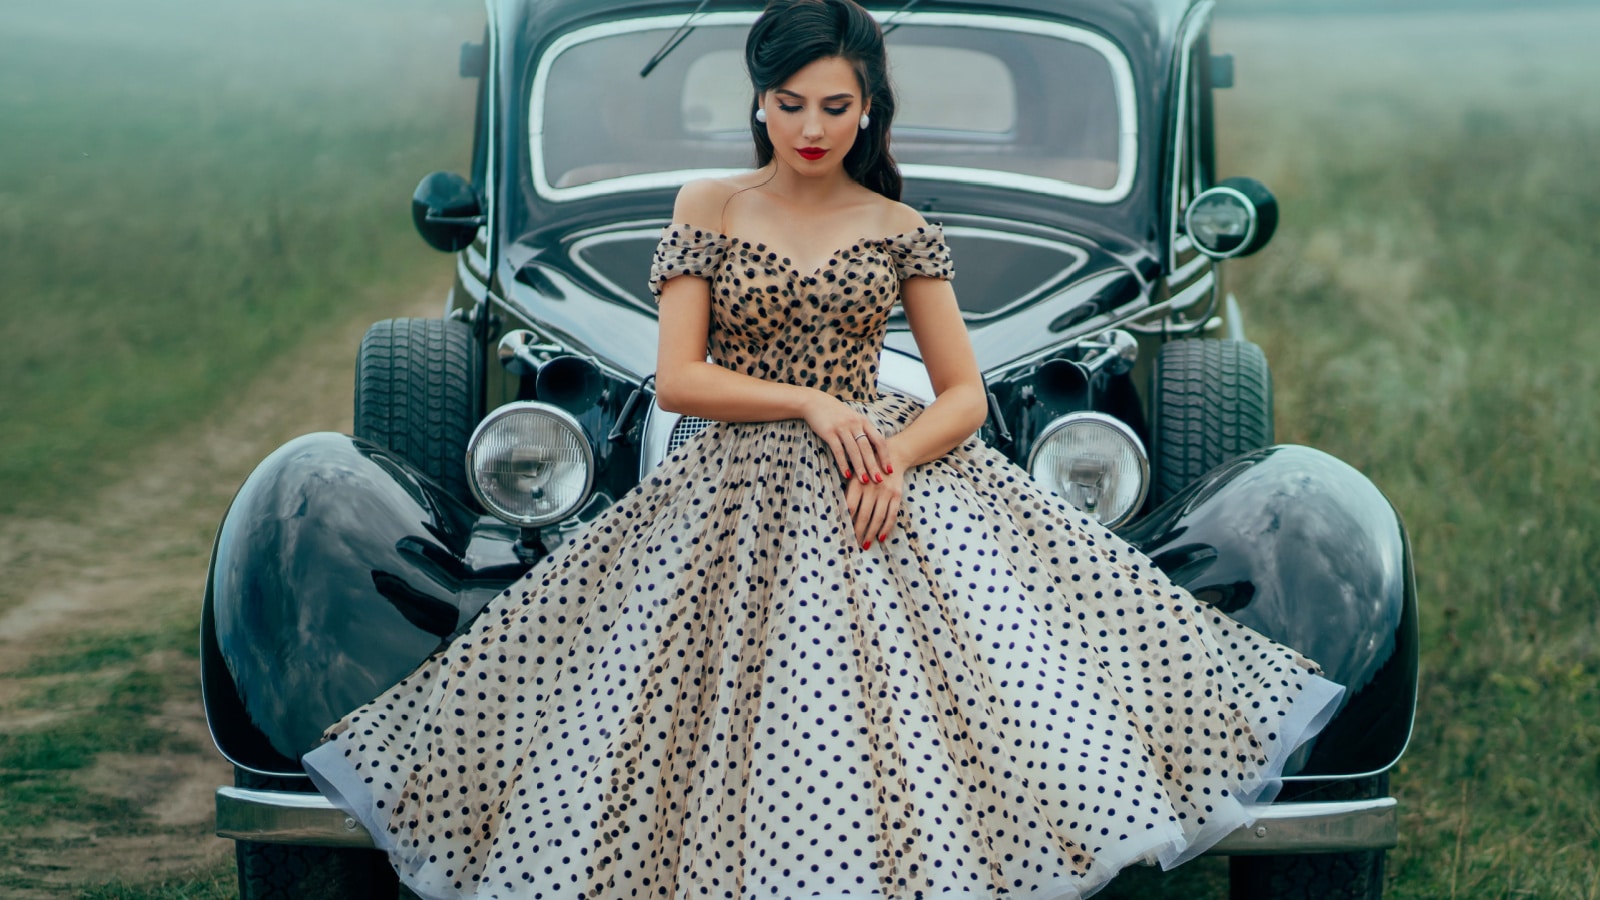 Young beautiful sexy woman in pin up style clothes posing near black retro car. Polka dot white dress, vintage hairstyle, red high heels. Background road green nature fog. Girl fashion model driver